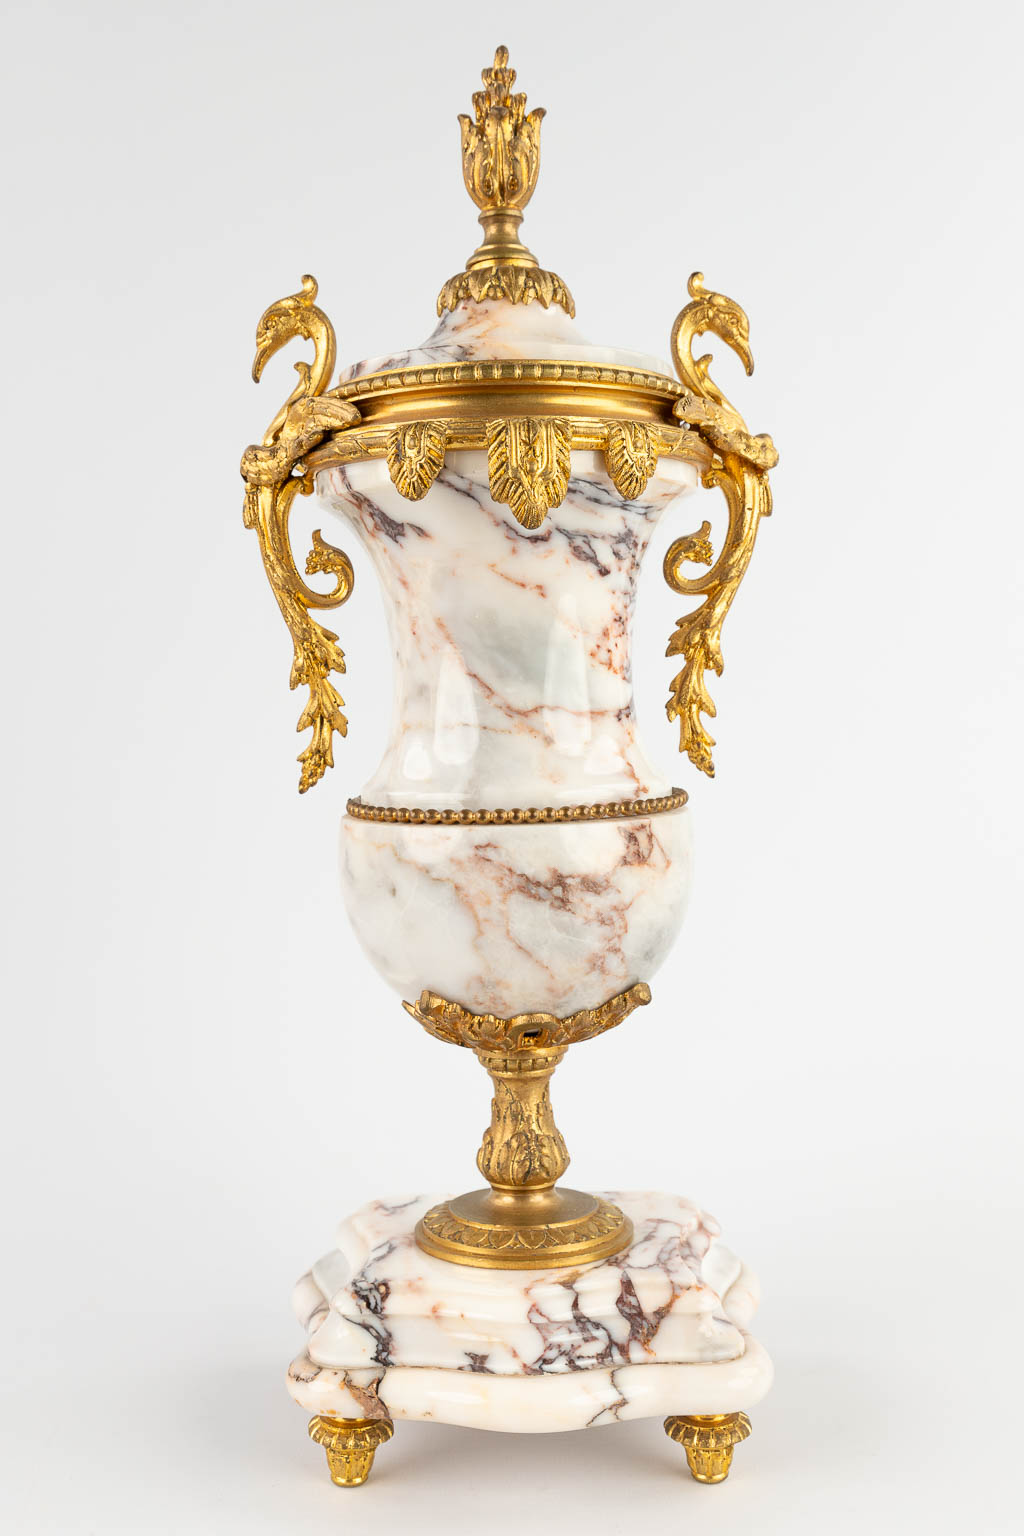 A three-piece mantle garniture portico clock and cassolettes, bronze mounted marble. 19th C. (D:19 x W:38 x H:51 cm)